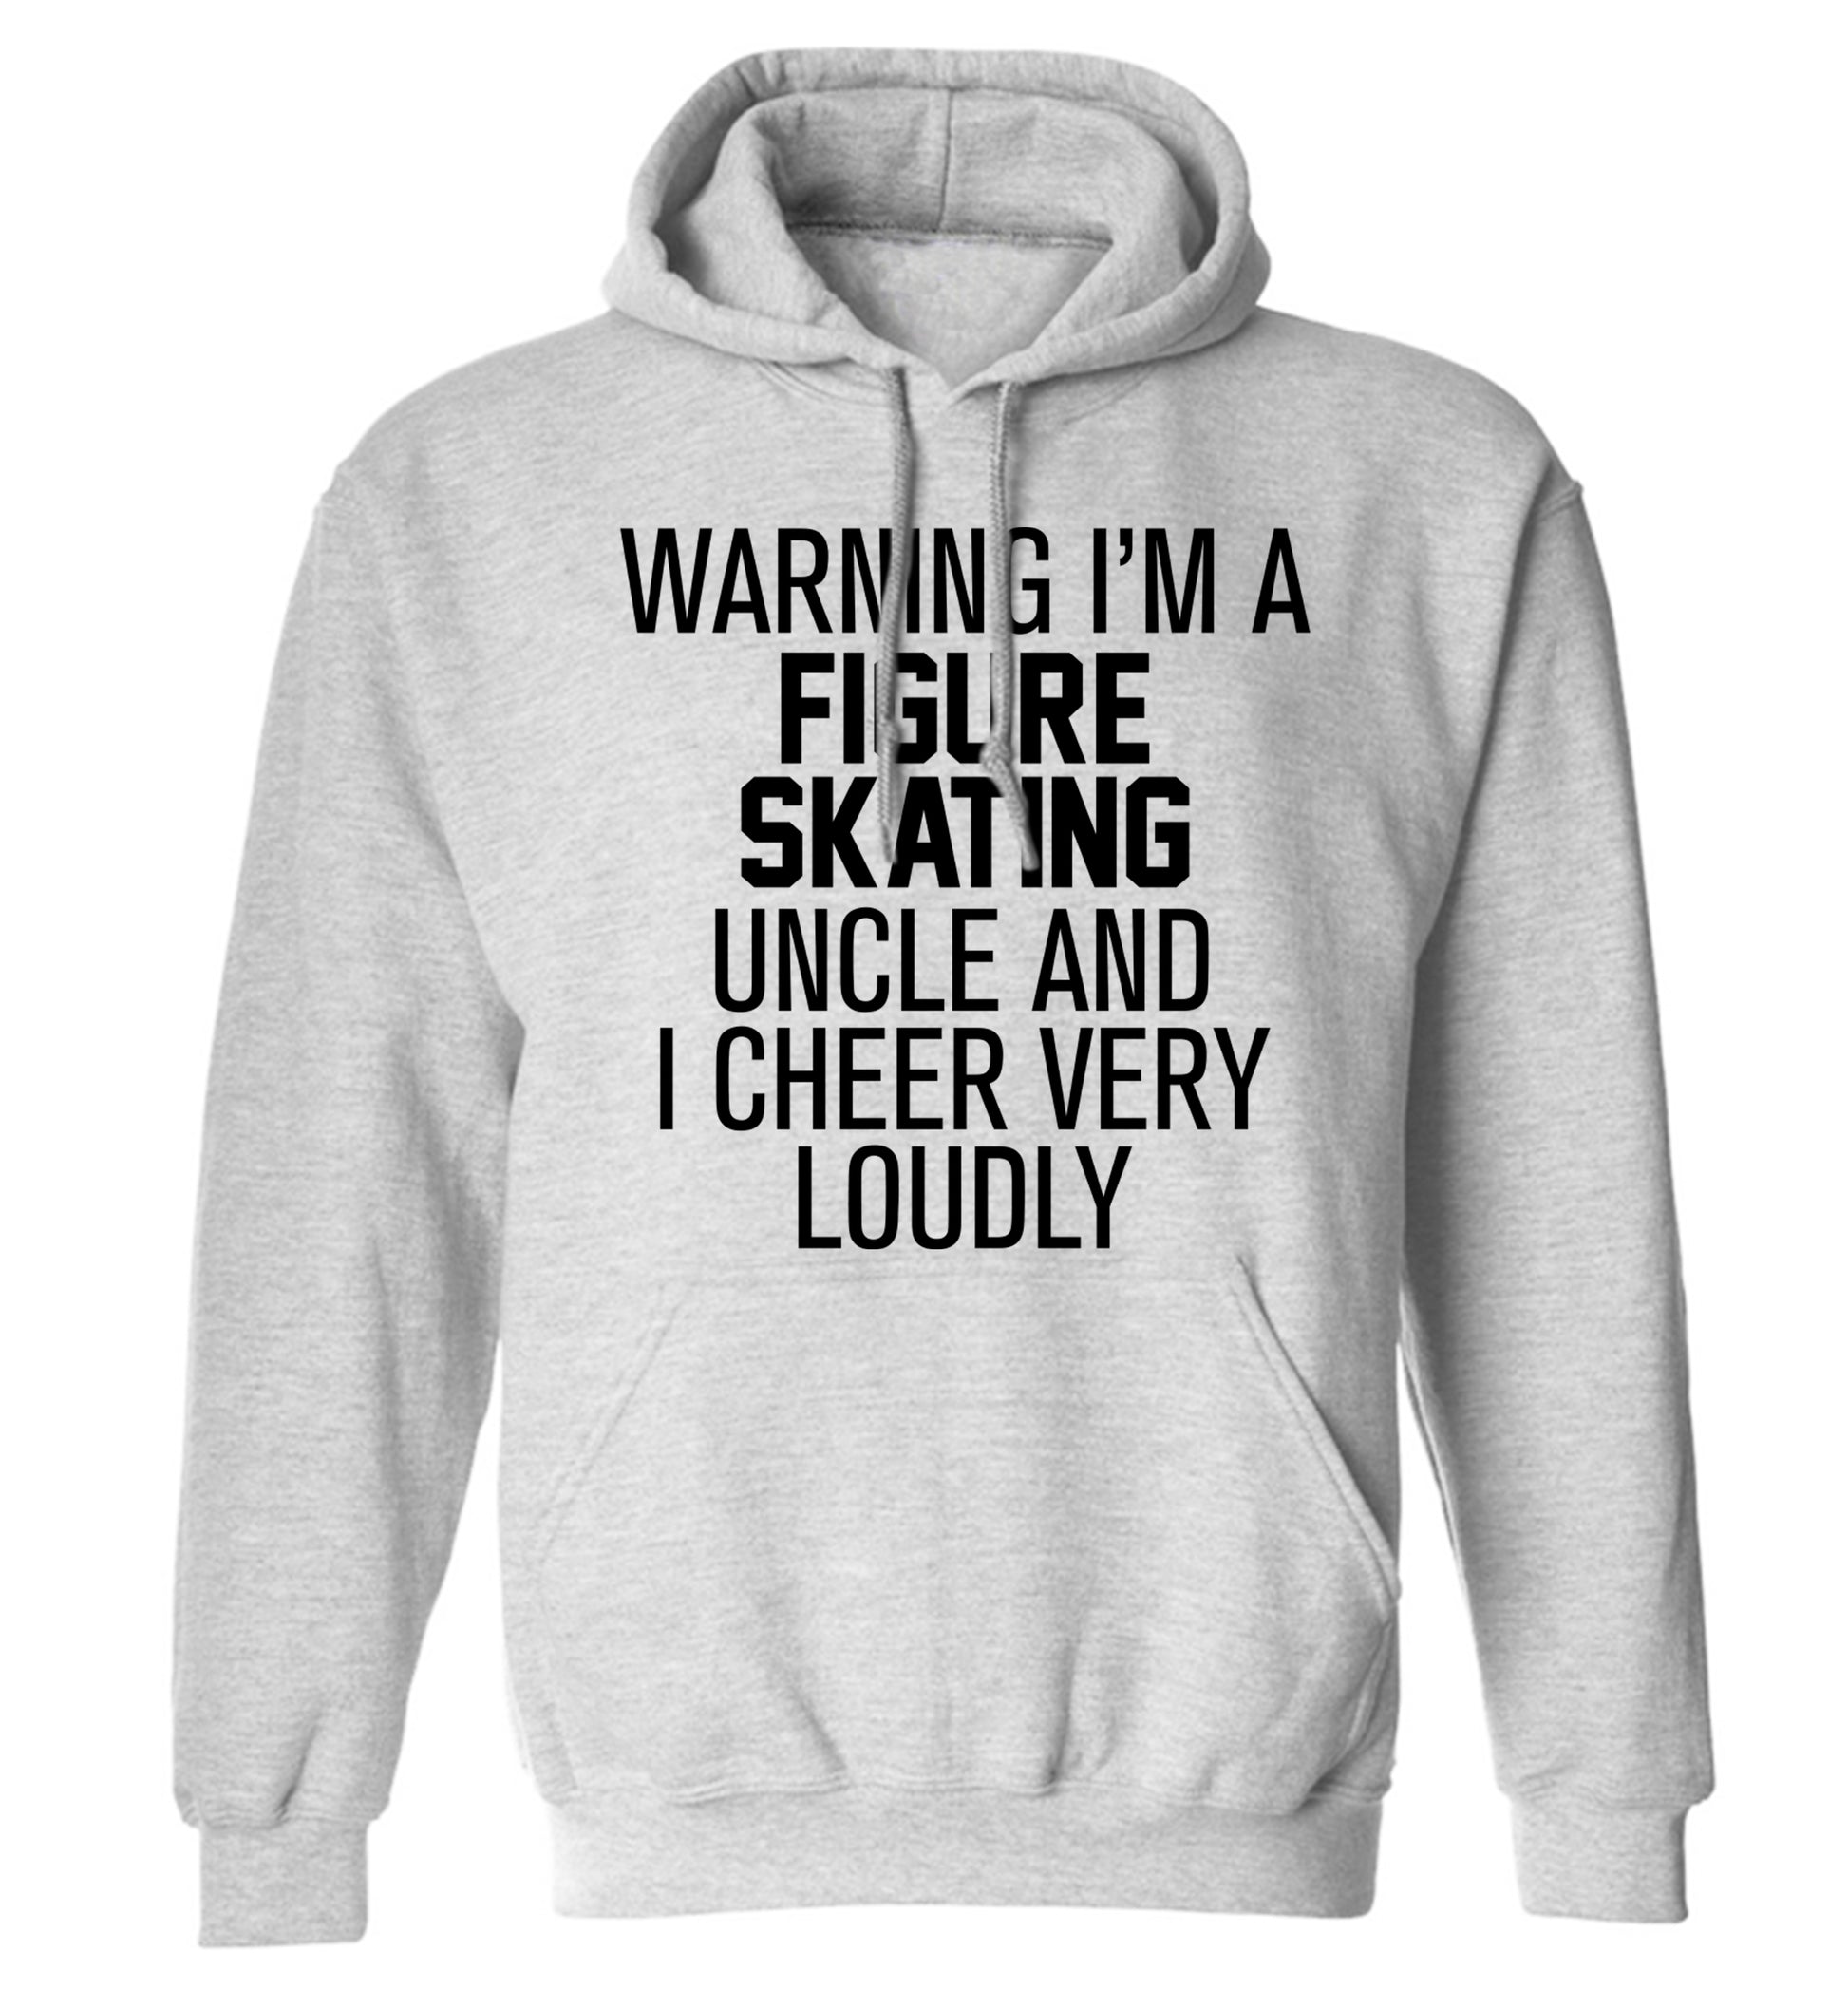 Warning I'm a figure skating uncle and I cheer very loudly adults unisexgrey hoodie 2XL